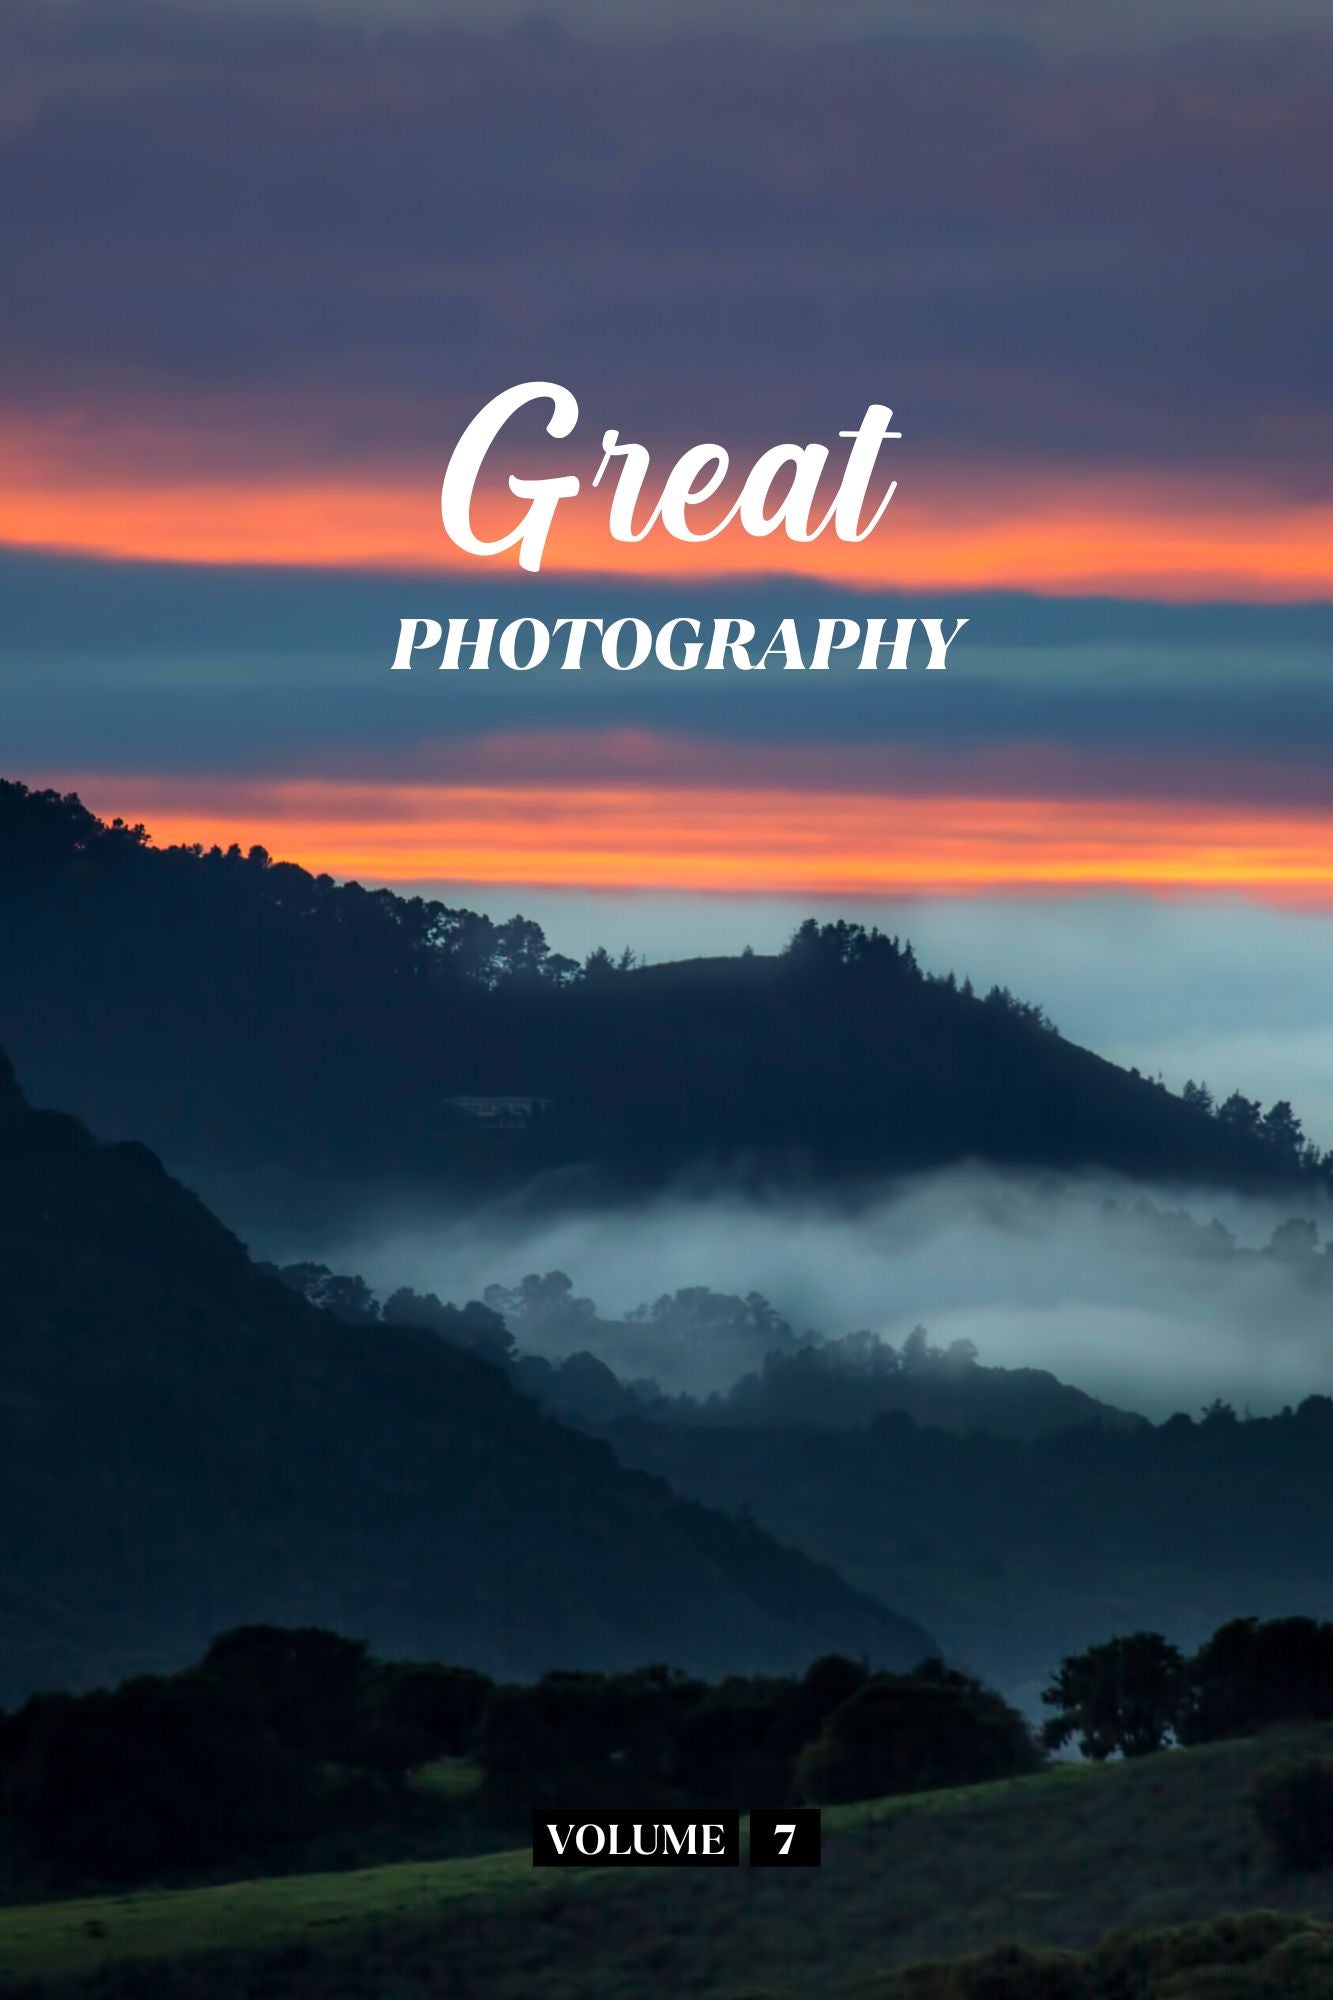 Great Photography Volume 7 (Physical Book)